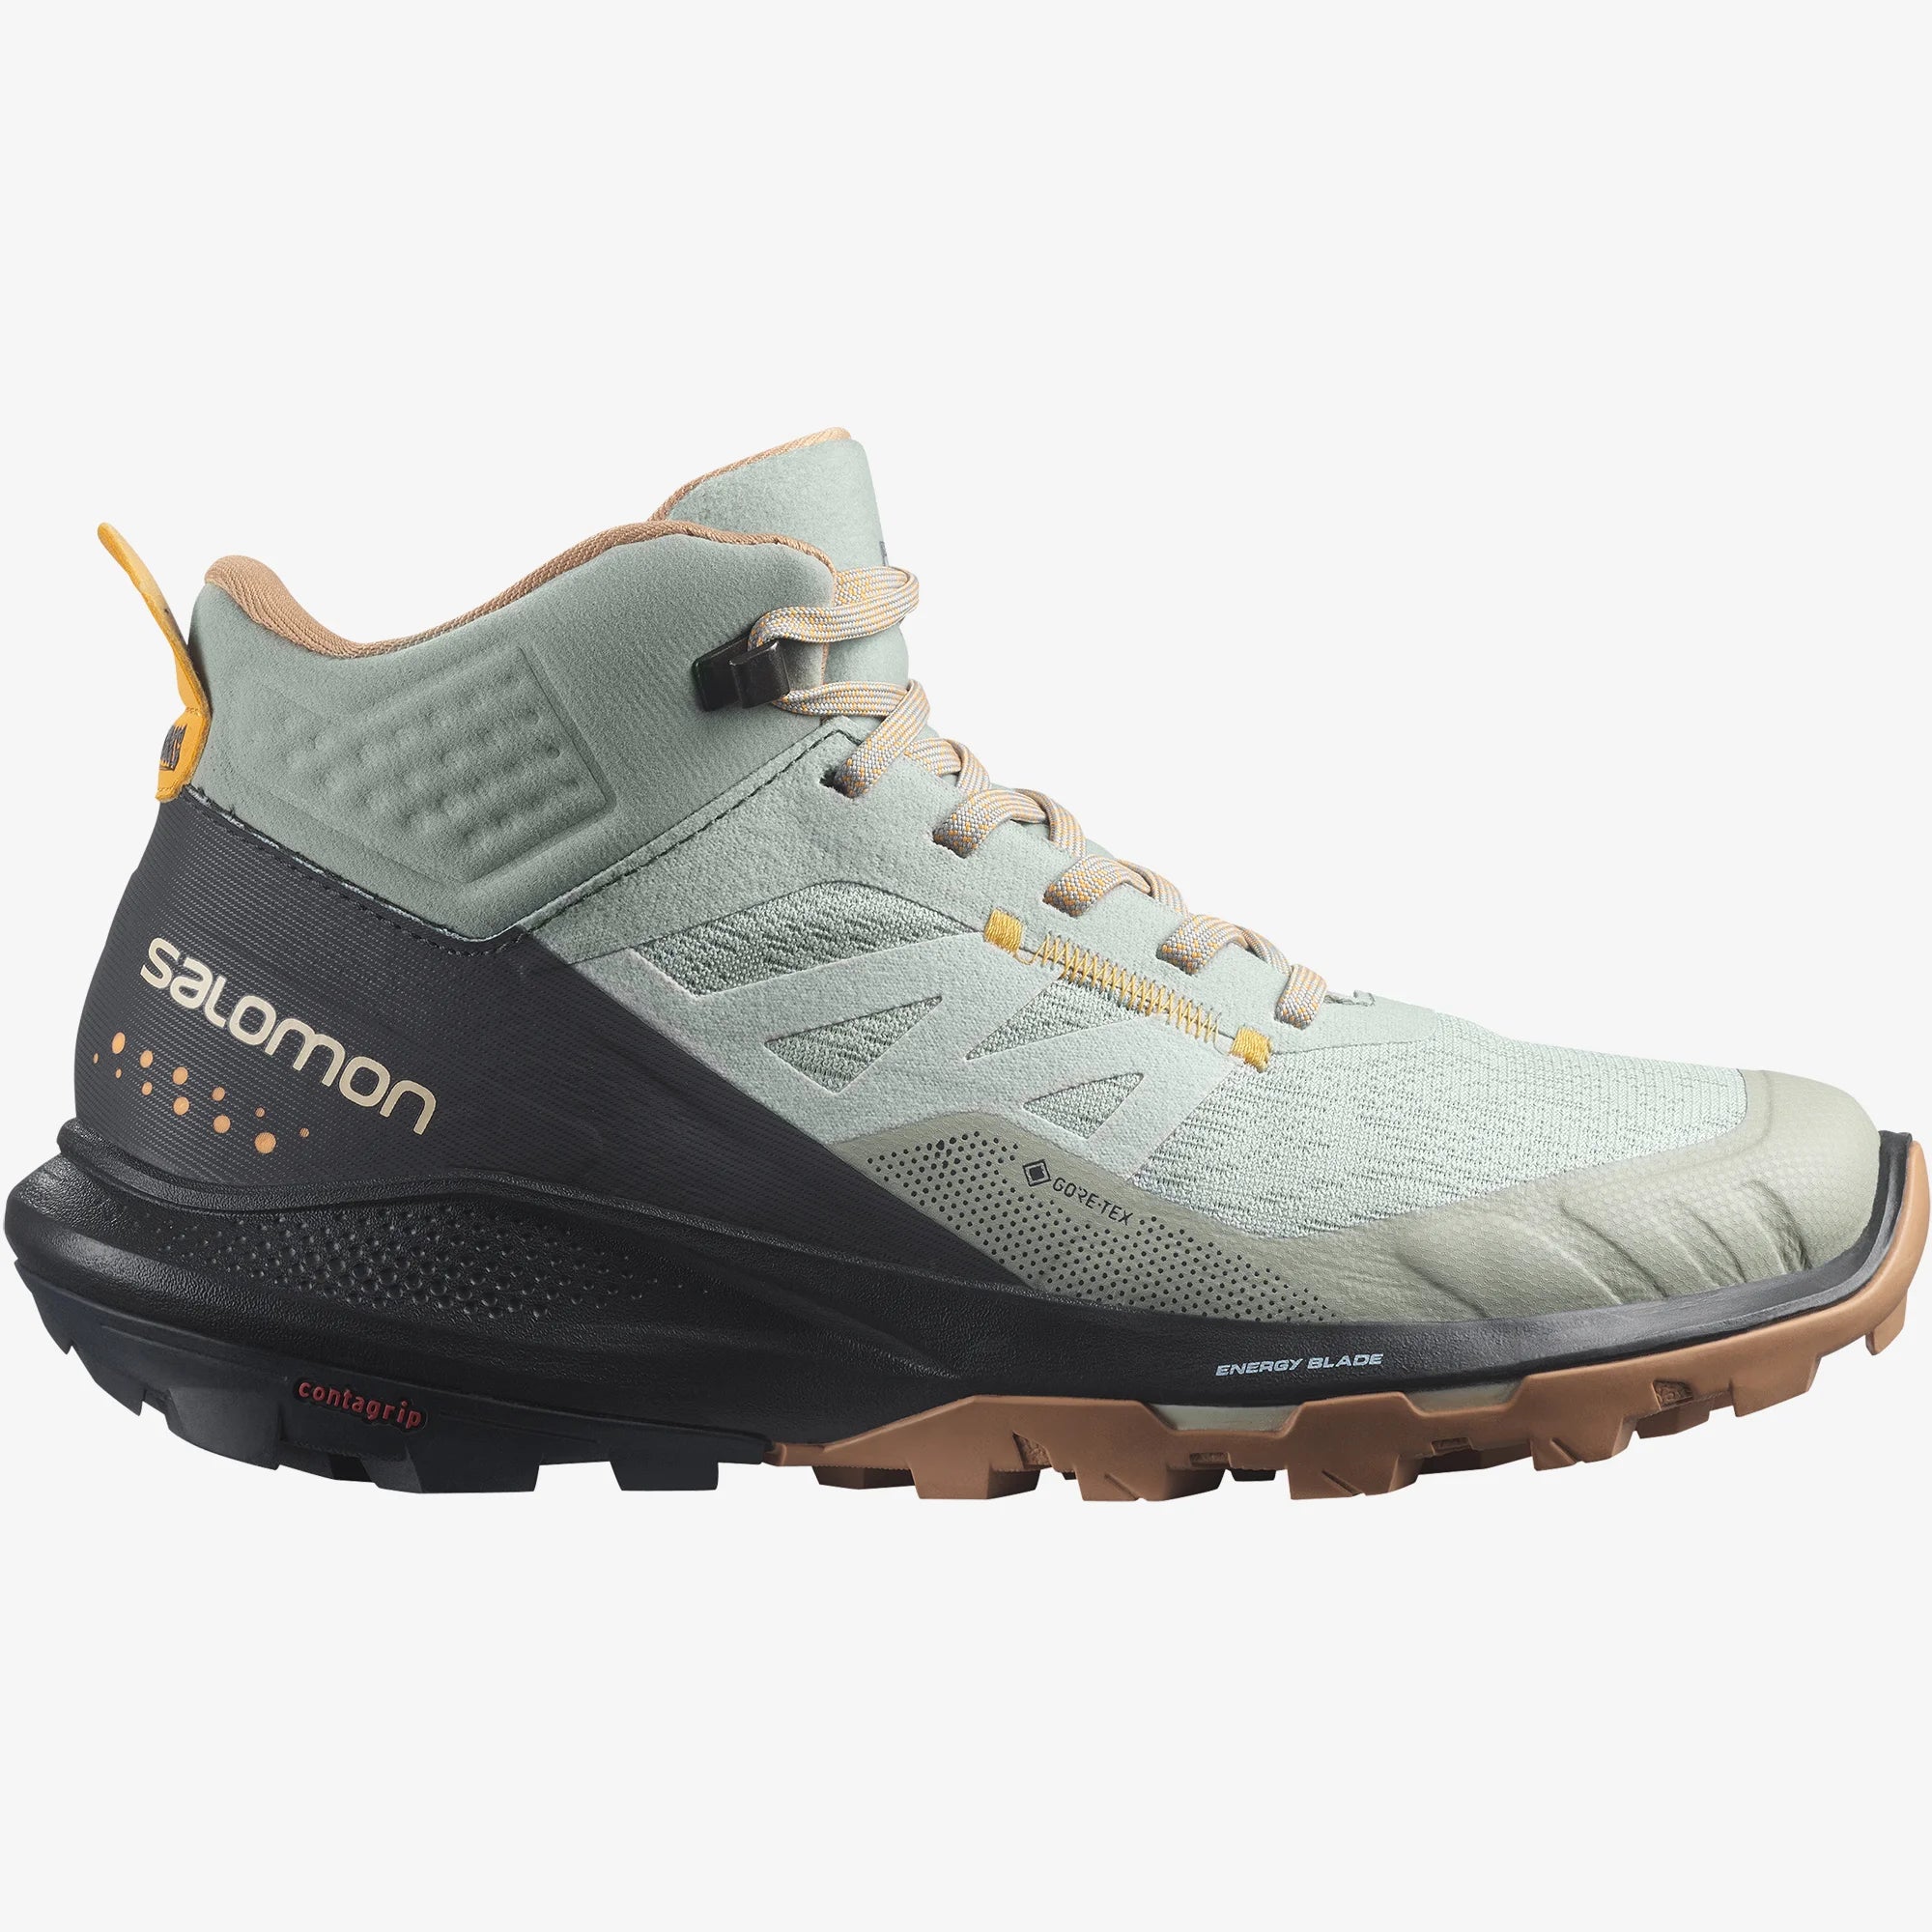 Outpulse Mid Gore-Tex Hiking Shoes - Womens